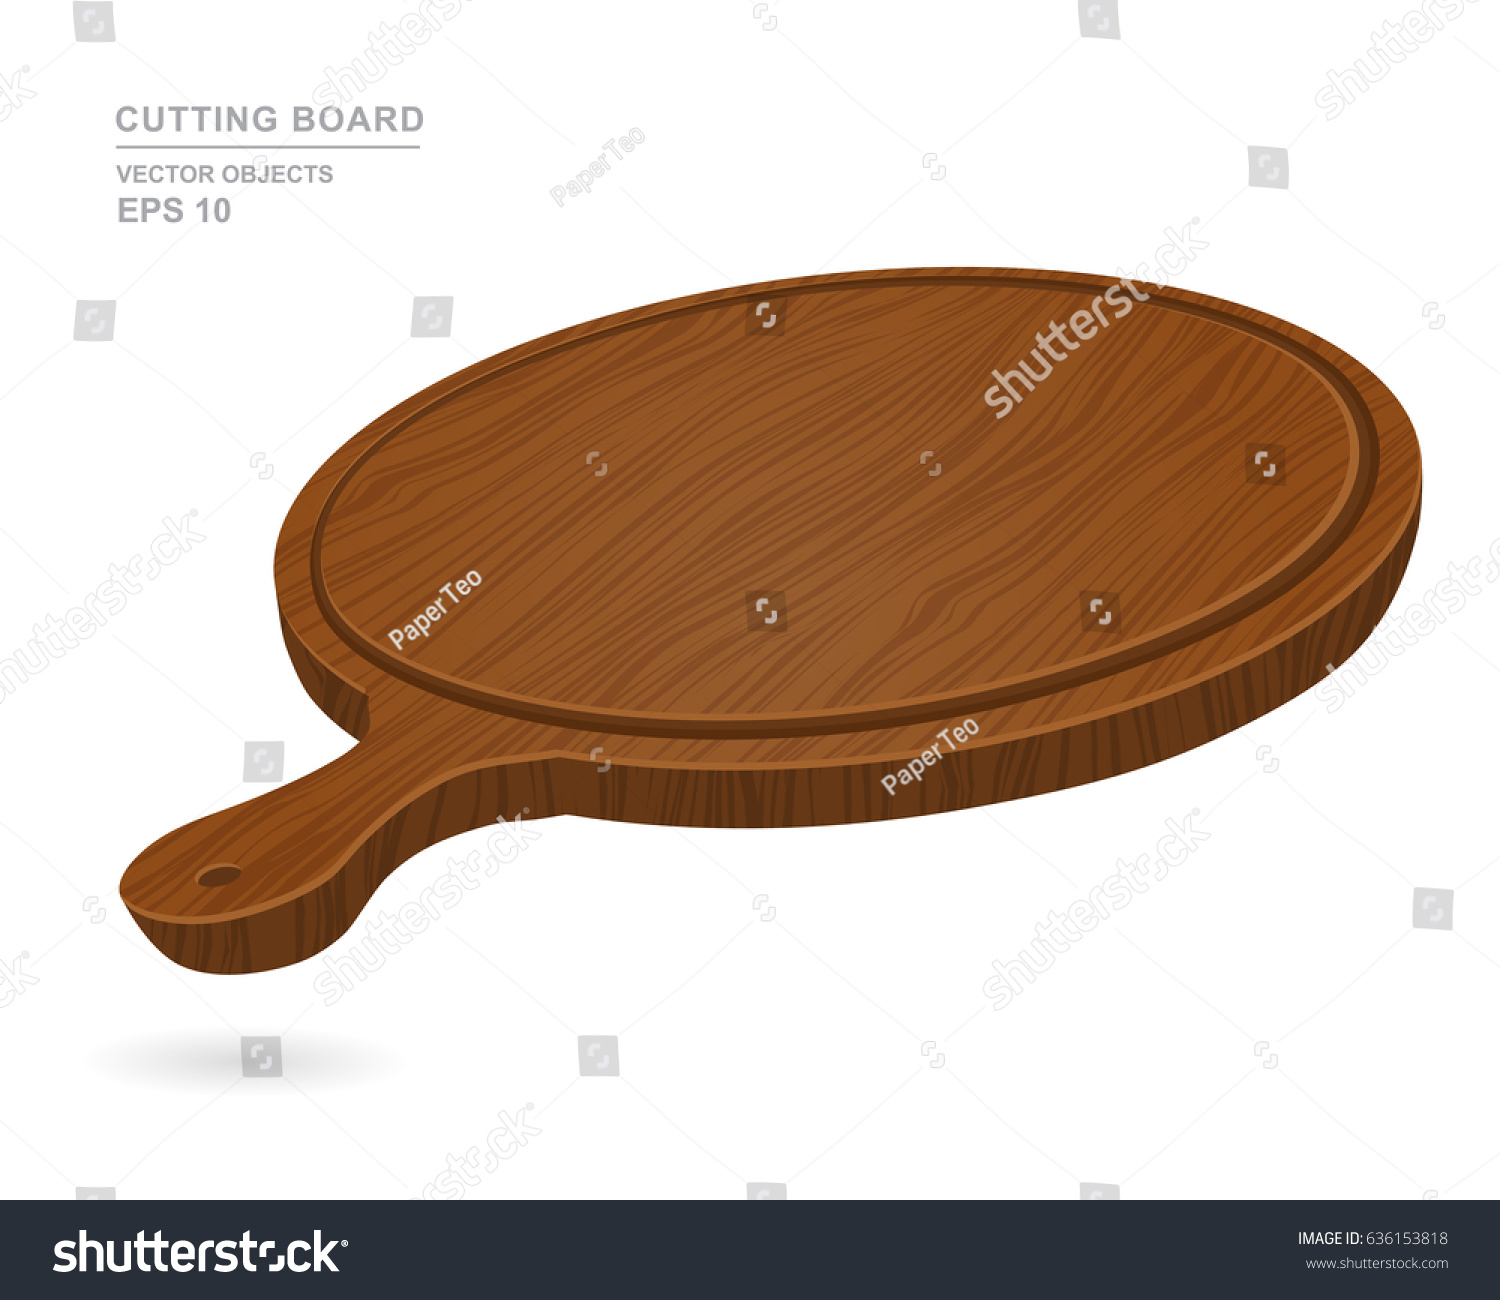 SVG of Wooden round empty cutting board for pizza isolated on white background. Vector illustration of kitchen object. Realistic design svg